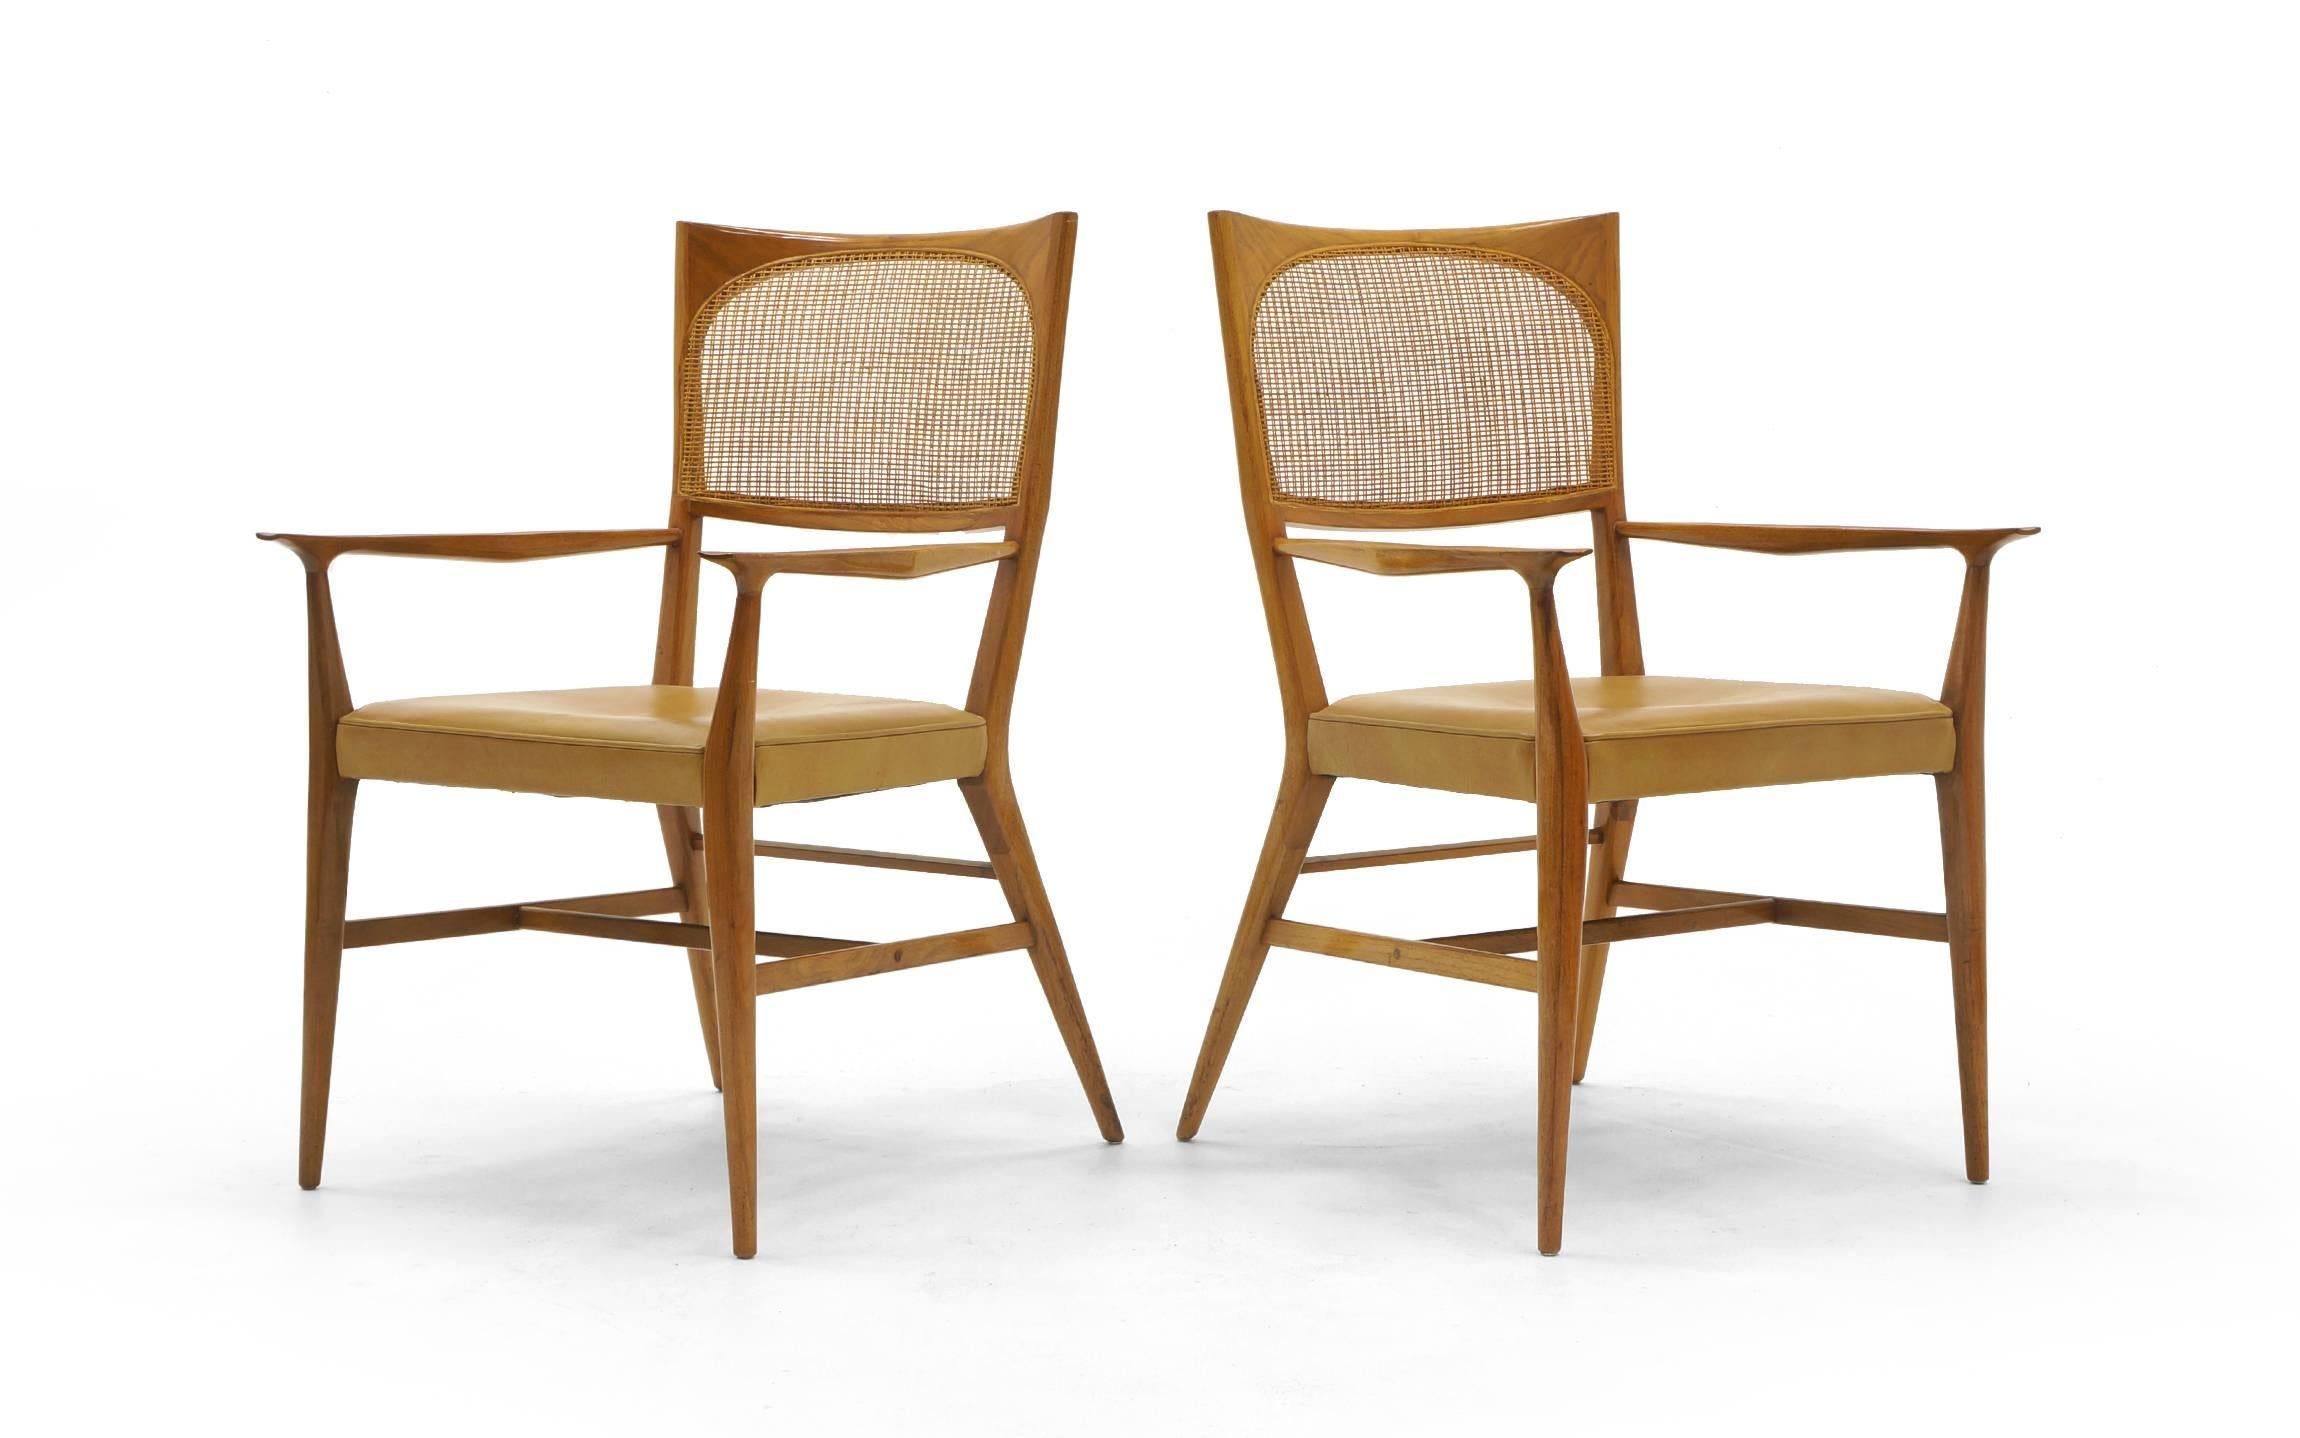 Pair of Paul McCobb for H. Sacks & Sons, Marlboro dining chairs from the New England Collection, Brookline, MA, USA, 1960s, each signed with Sacks label,  All original fruitwood frames, leather seats and cane backs in excellent condition.